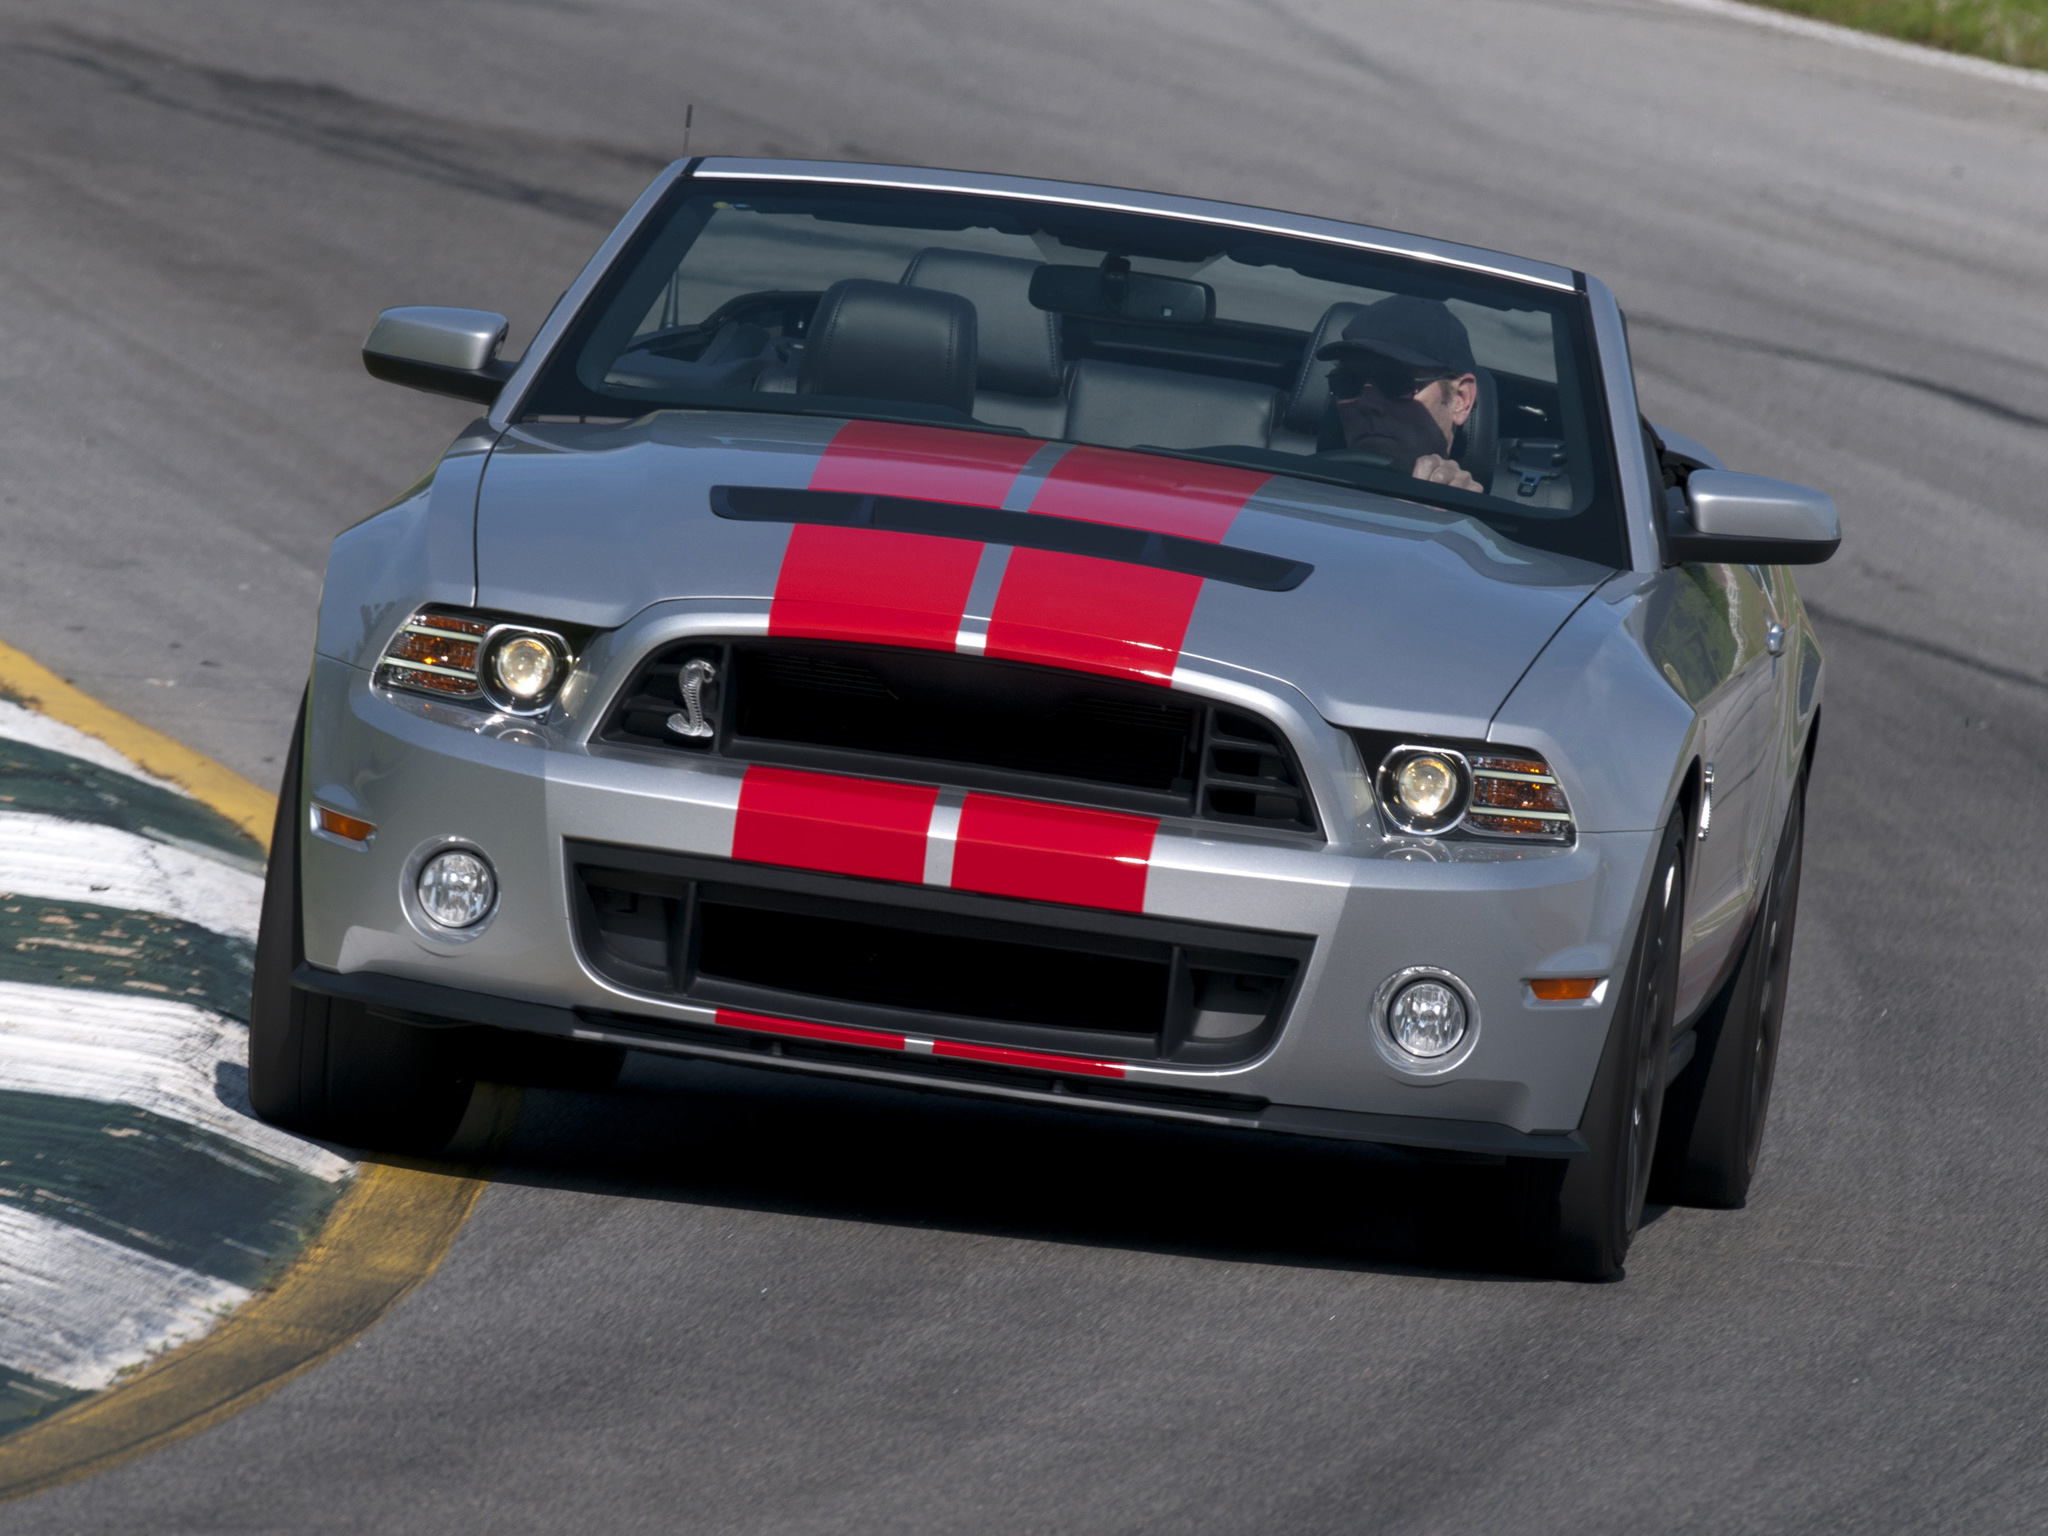 2012, Shelby, Gt500, Svt, Convertible, Ford, Mustang, Muscle Wallpaper